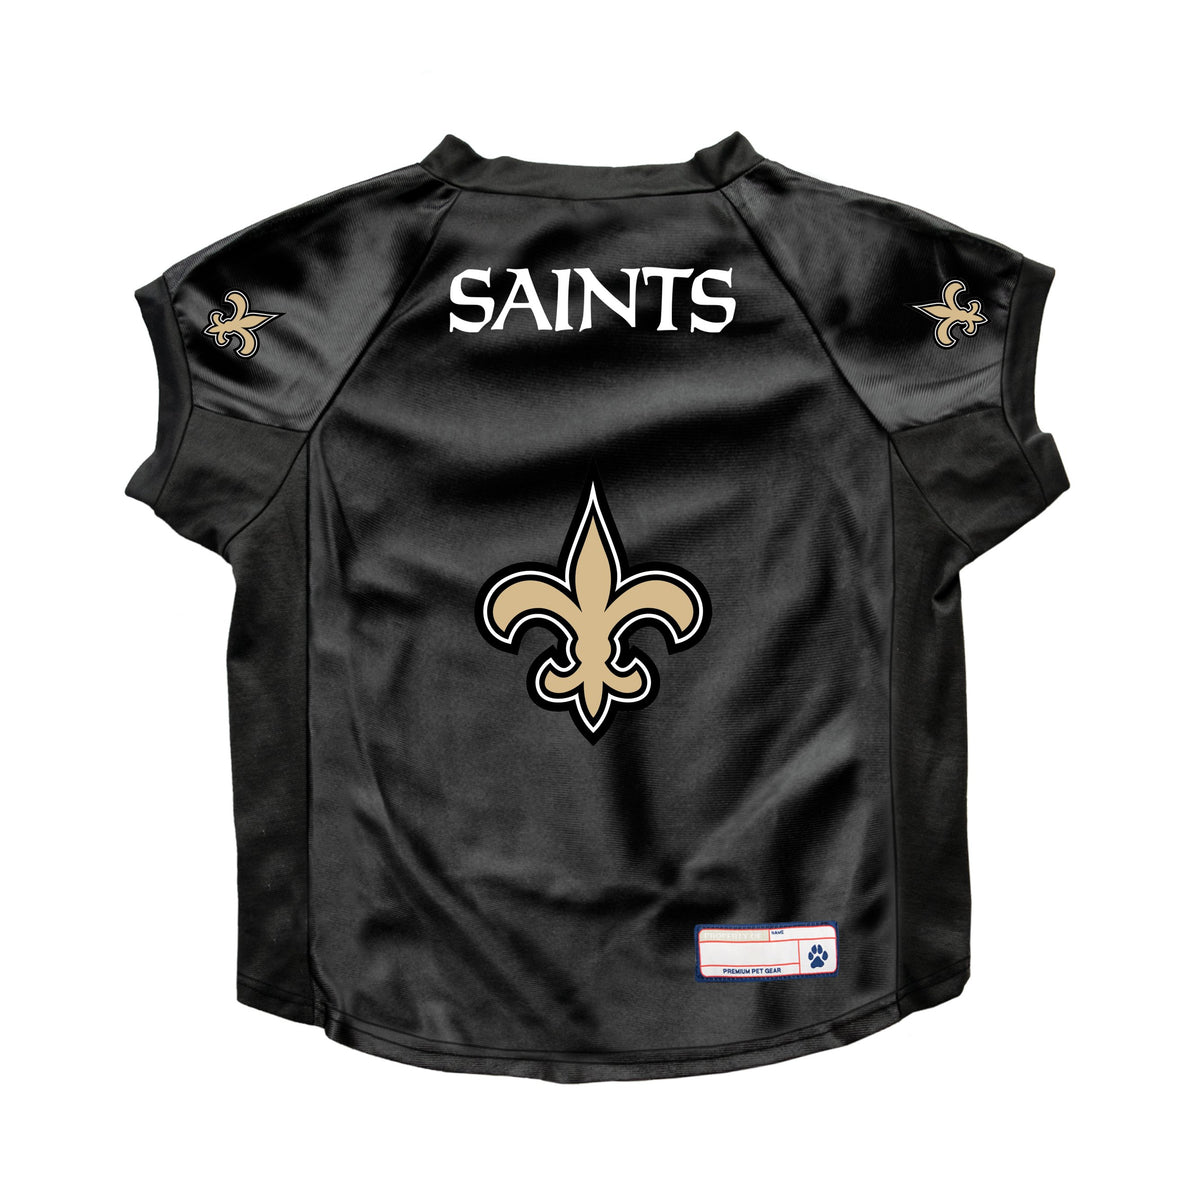 Officially Licensed NFL Love Tote - New Orleans Saints